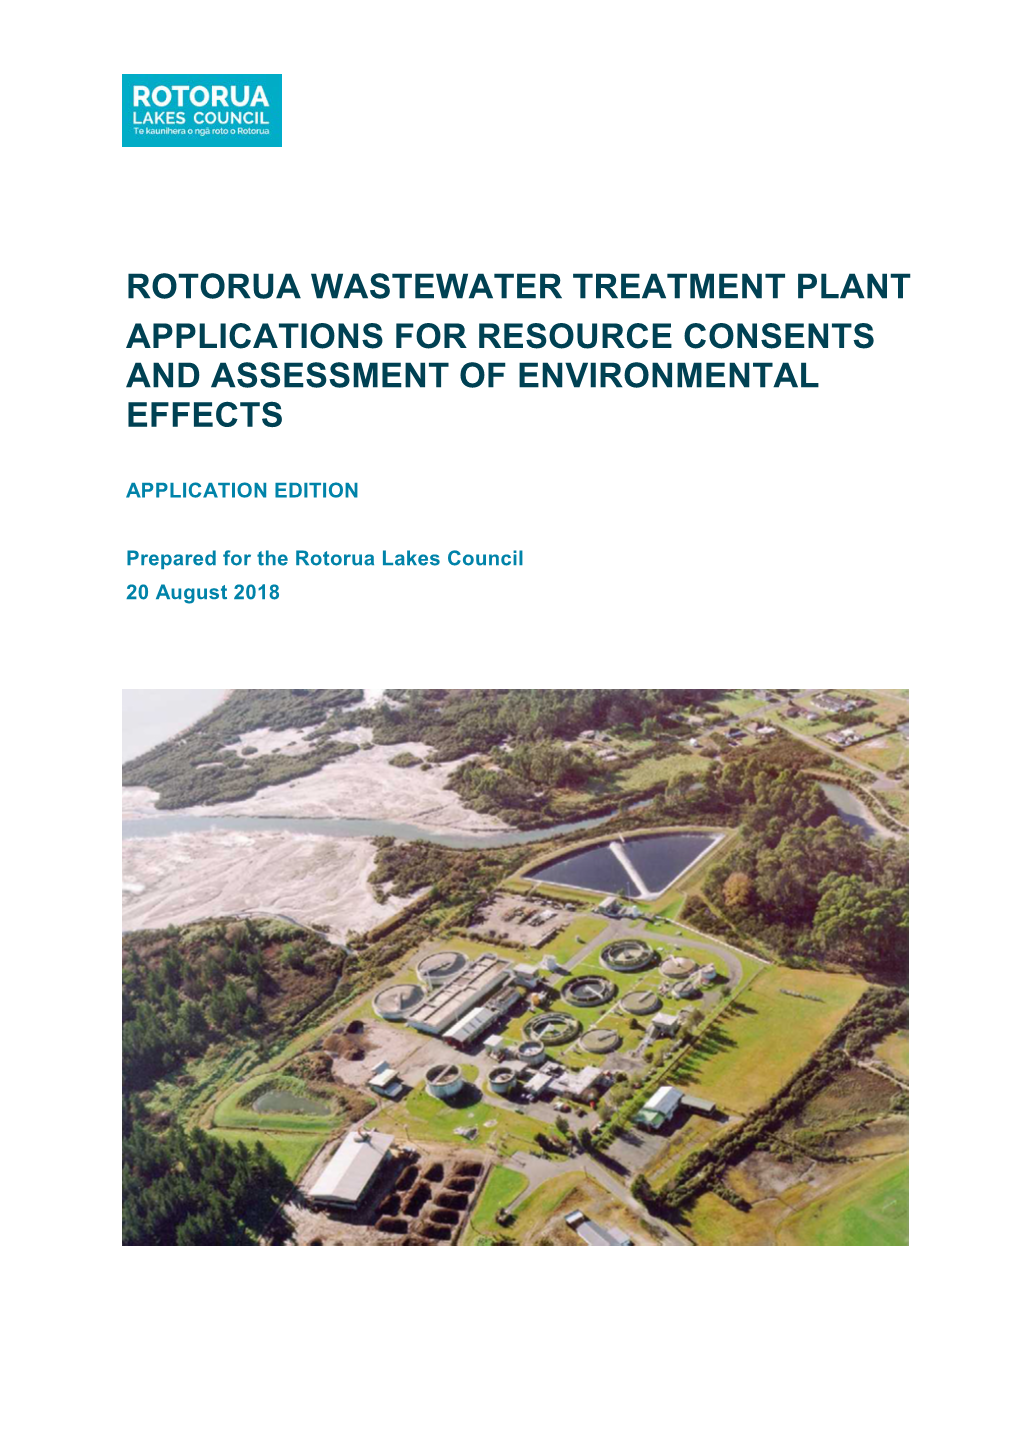 Rotorua Wastewater Treatment Plant Applications for Resource Consents and Assessment of Environmental Effects